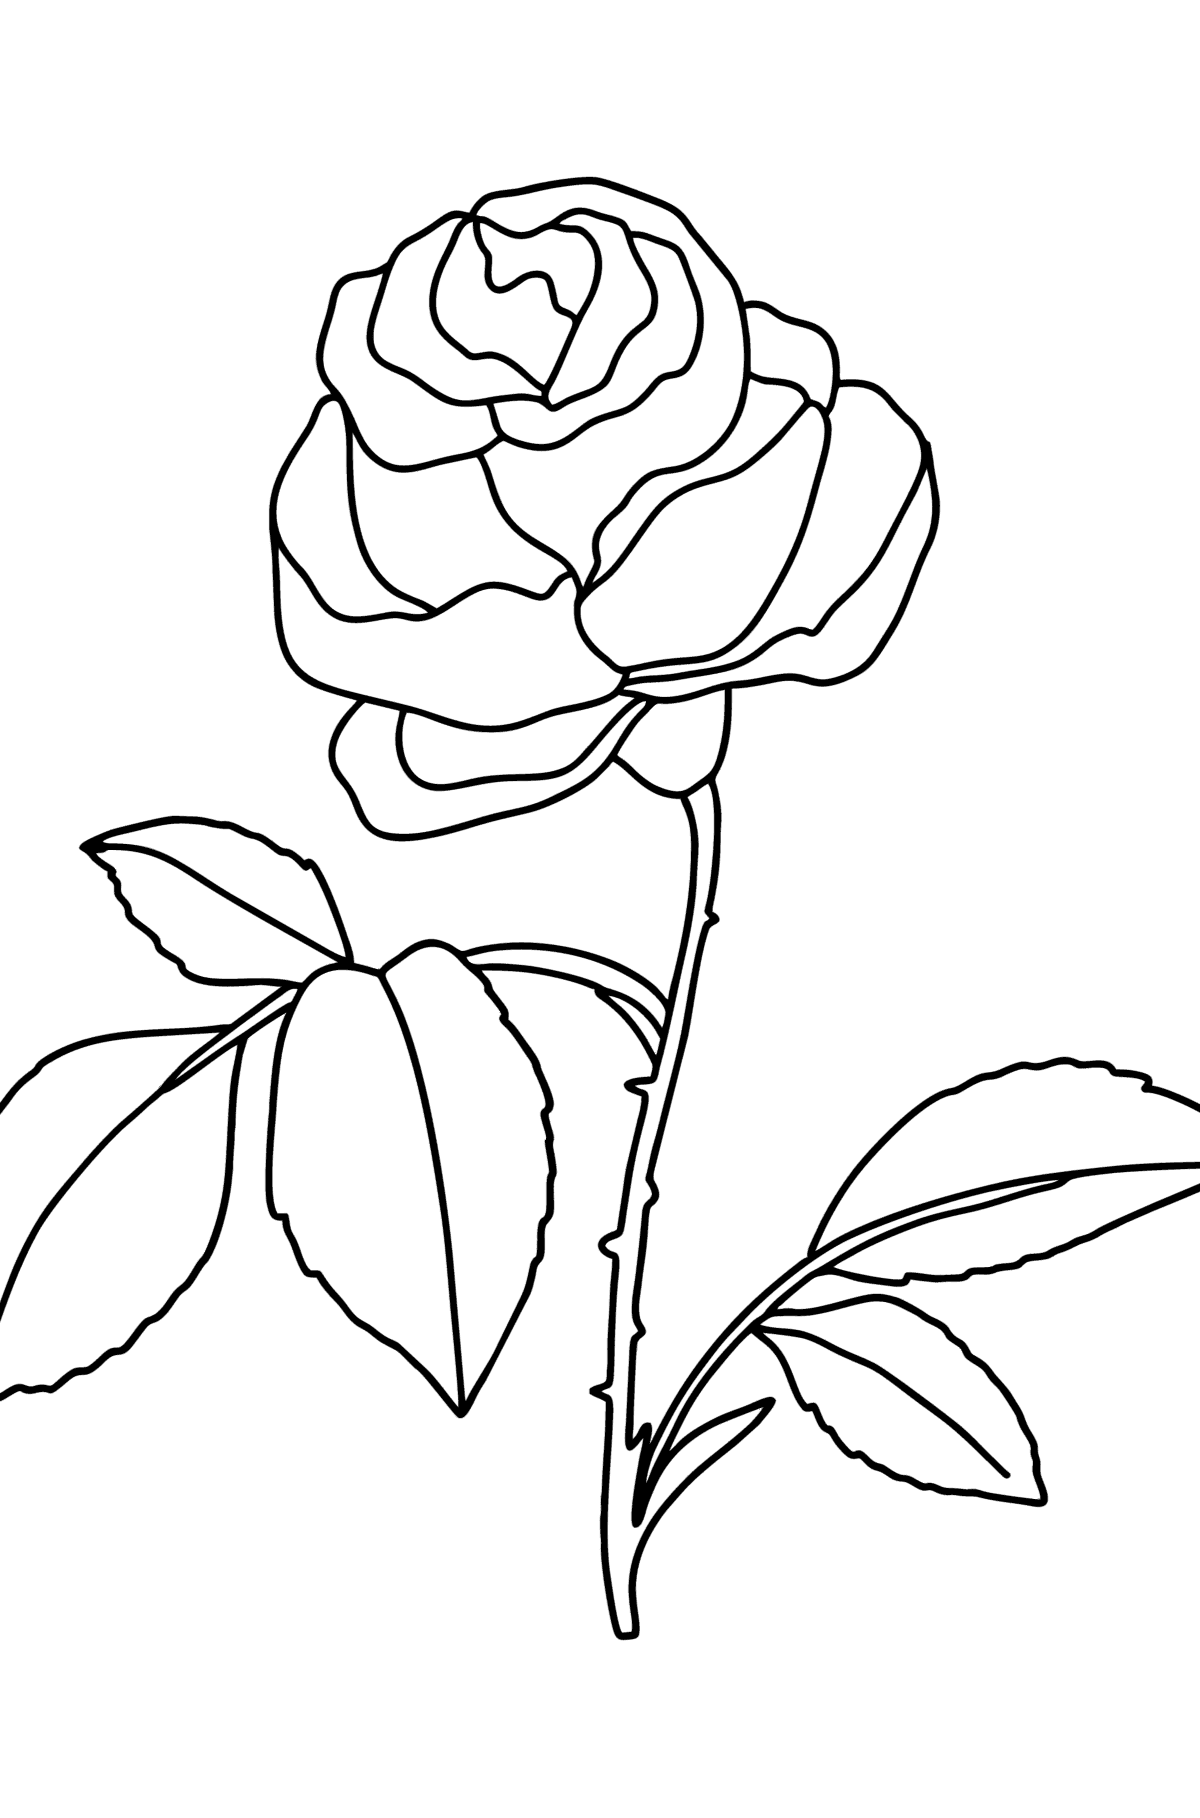 Red rose coloring page - Coloring Pages for Kids